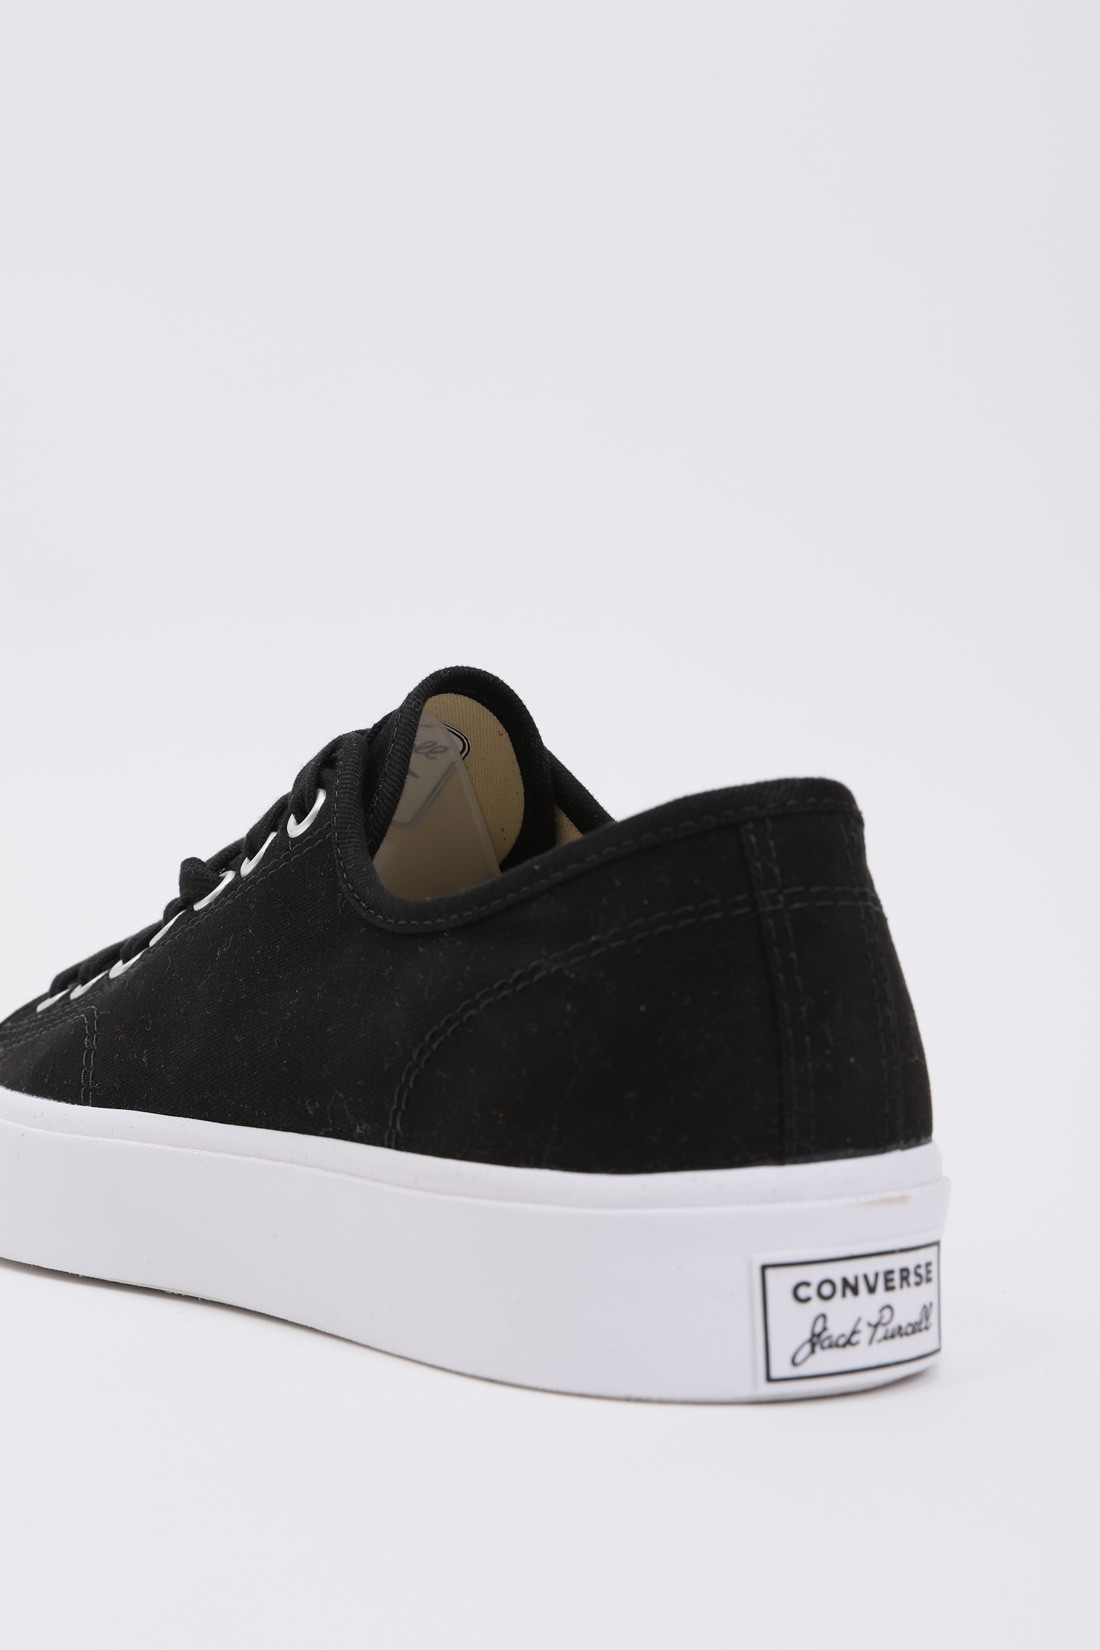 CONVERSE / Jack purcell ox Black